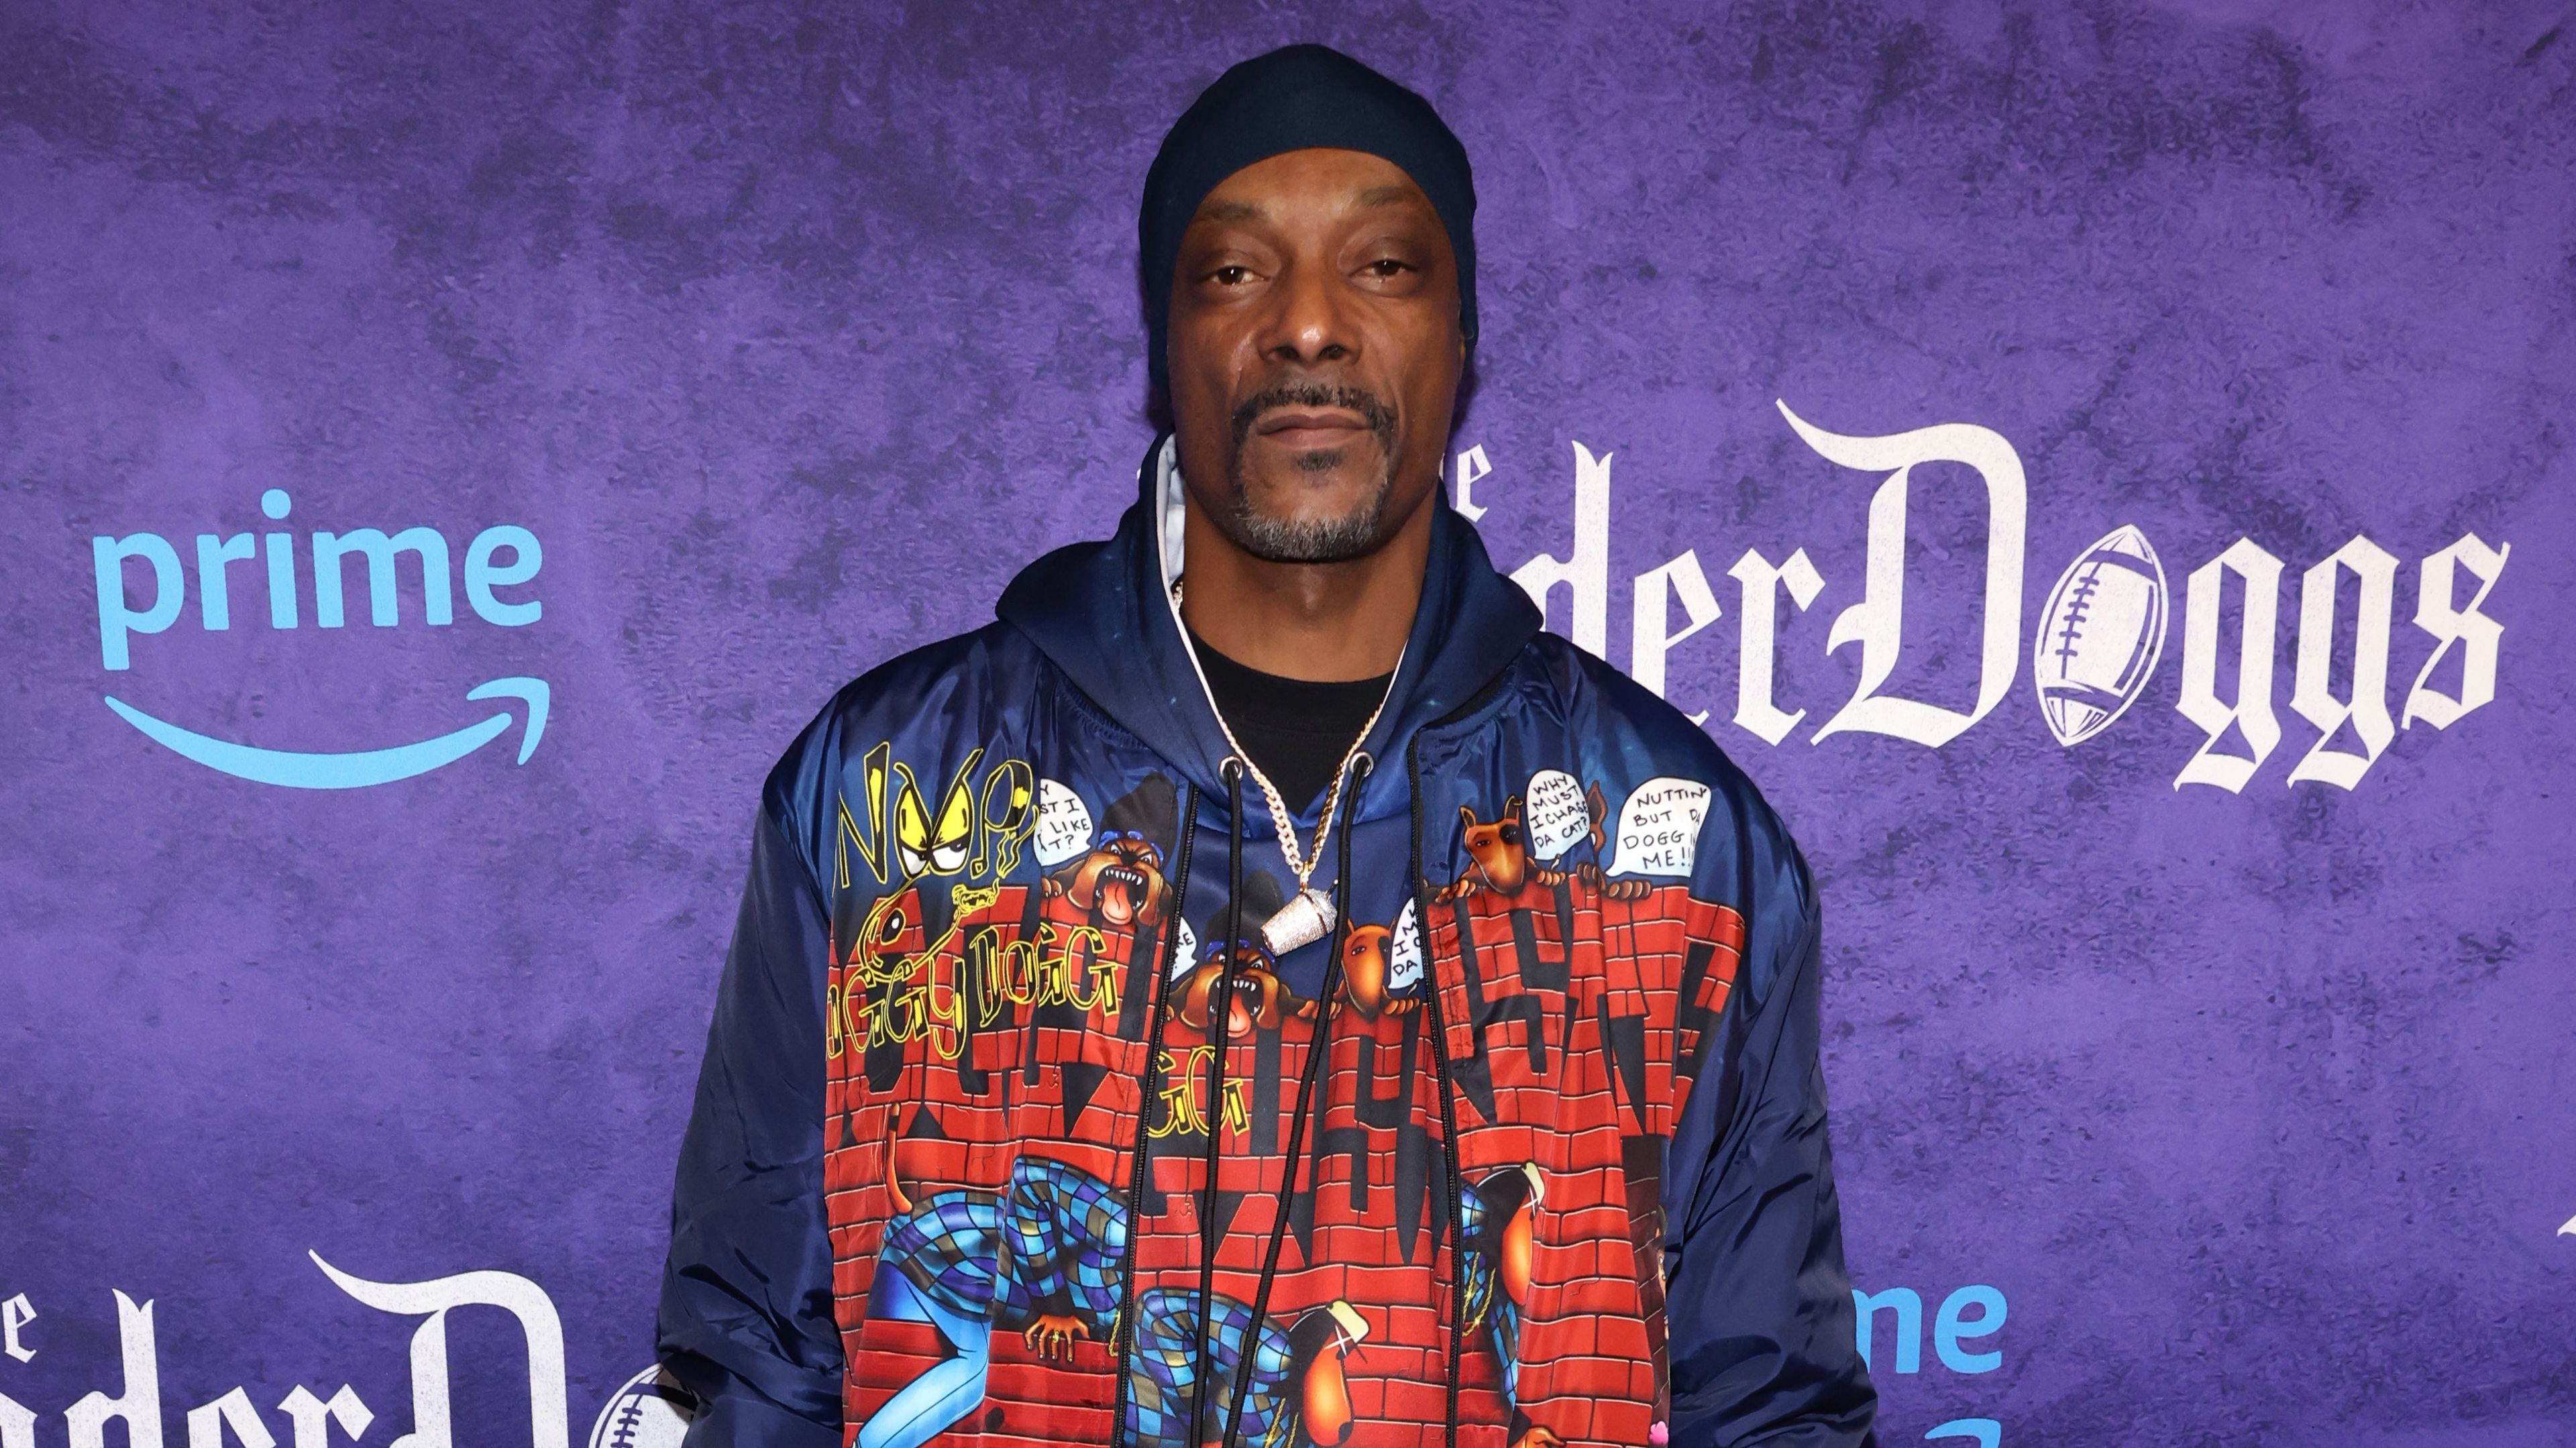 Snoop Dogg Gives Update On Highly Anticipated Album With Dr. Dre